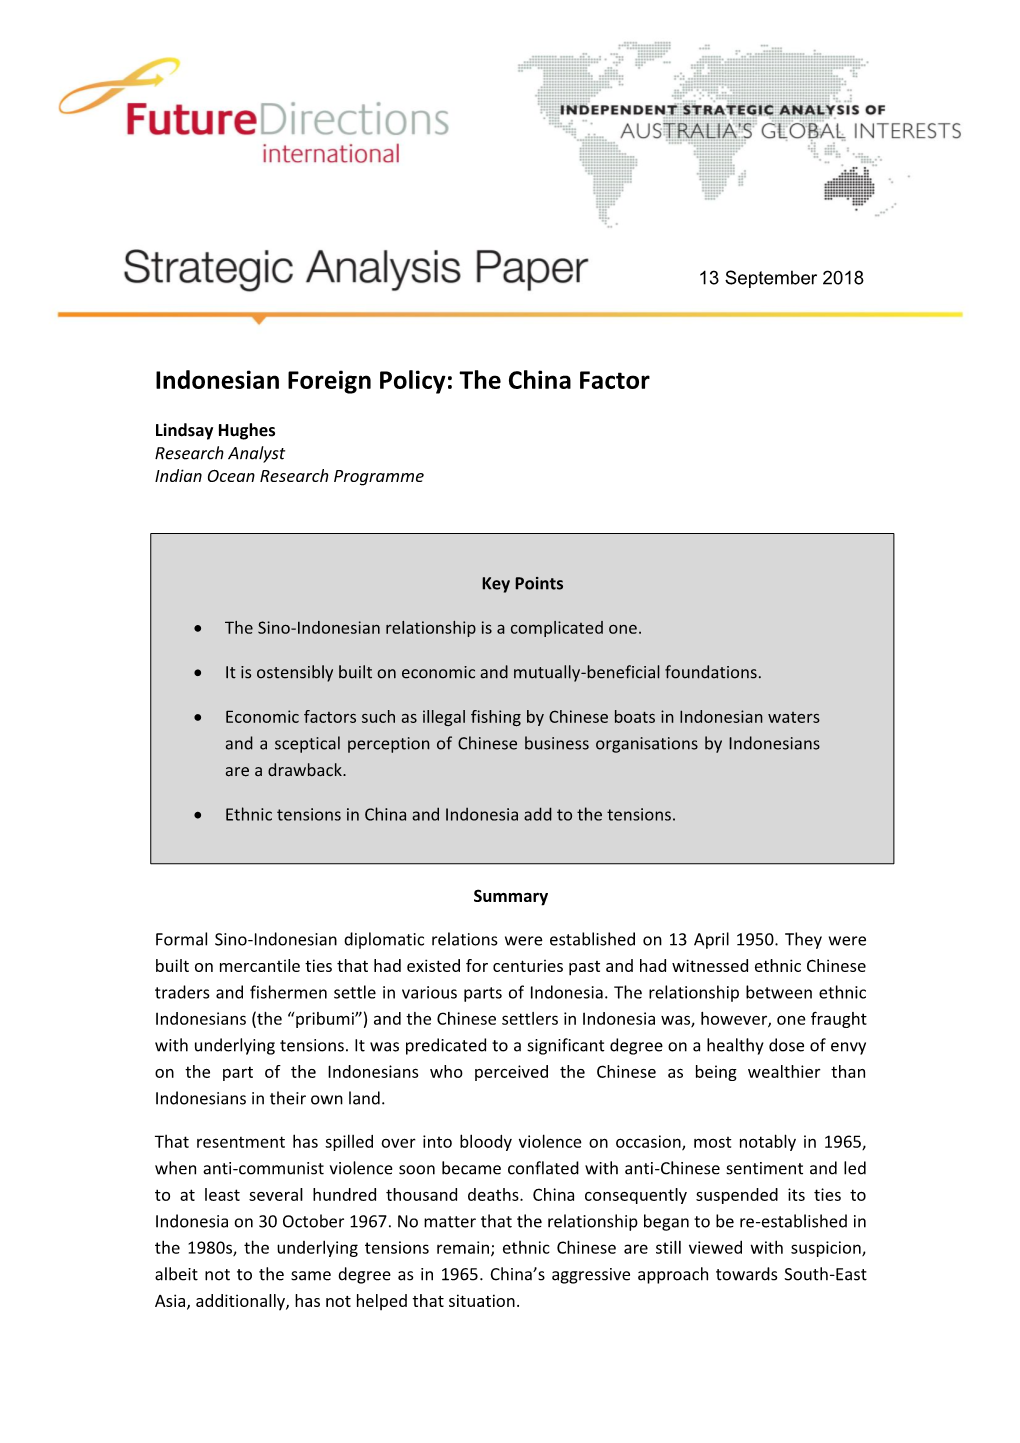 Indonesian Foreign Policy: the China Factor